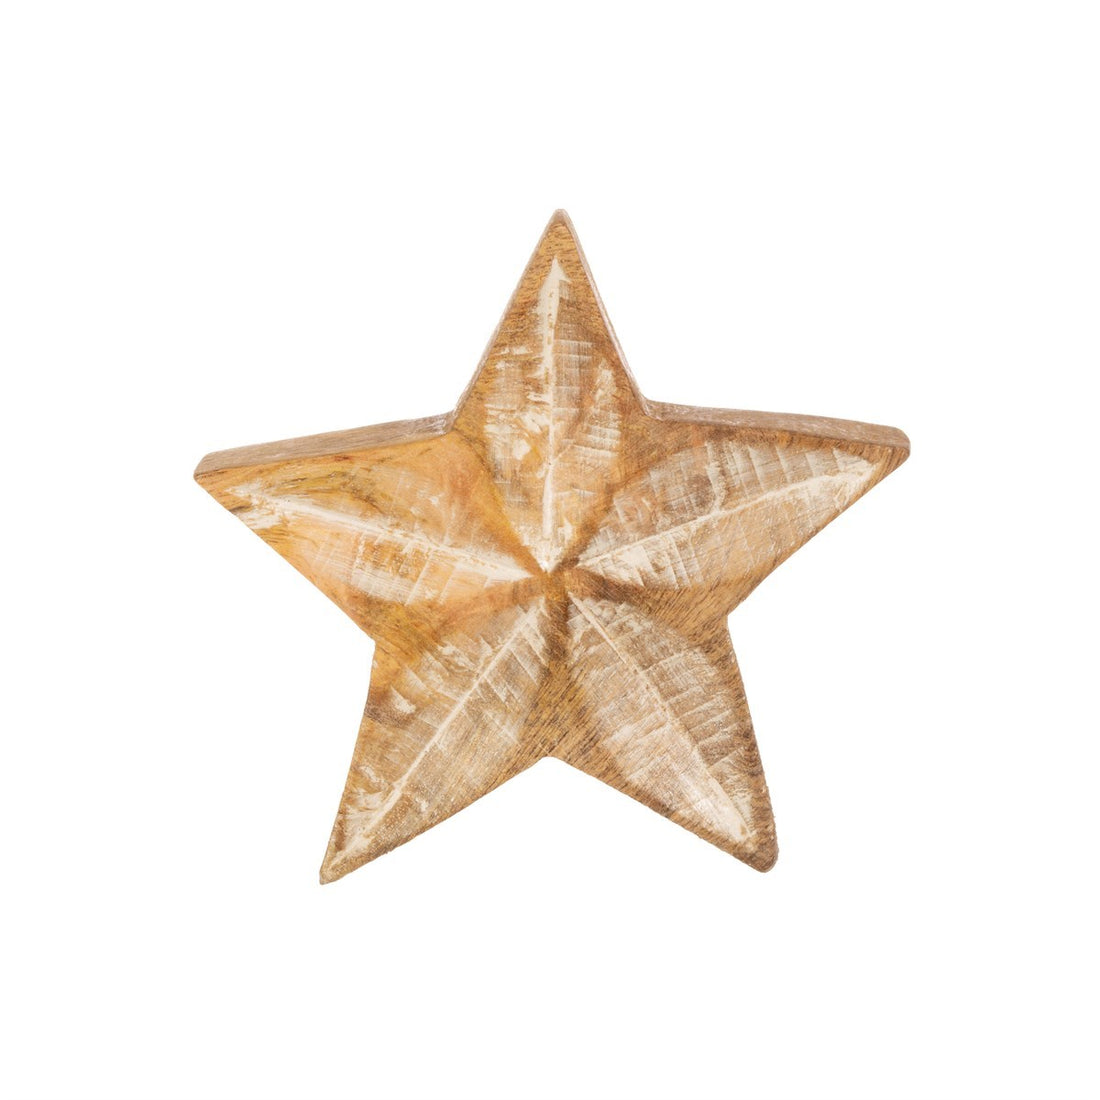 Rustic wooden star with etched line details 